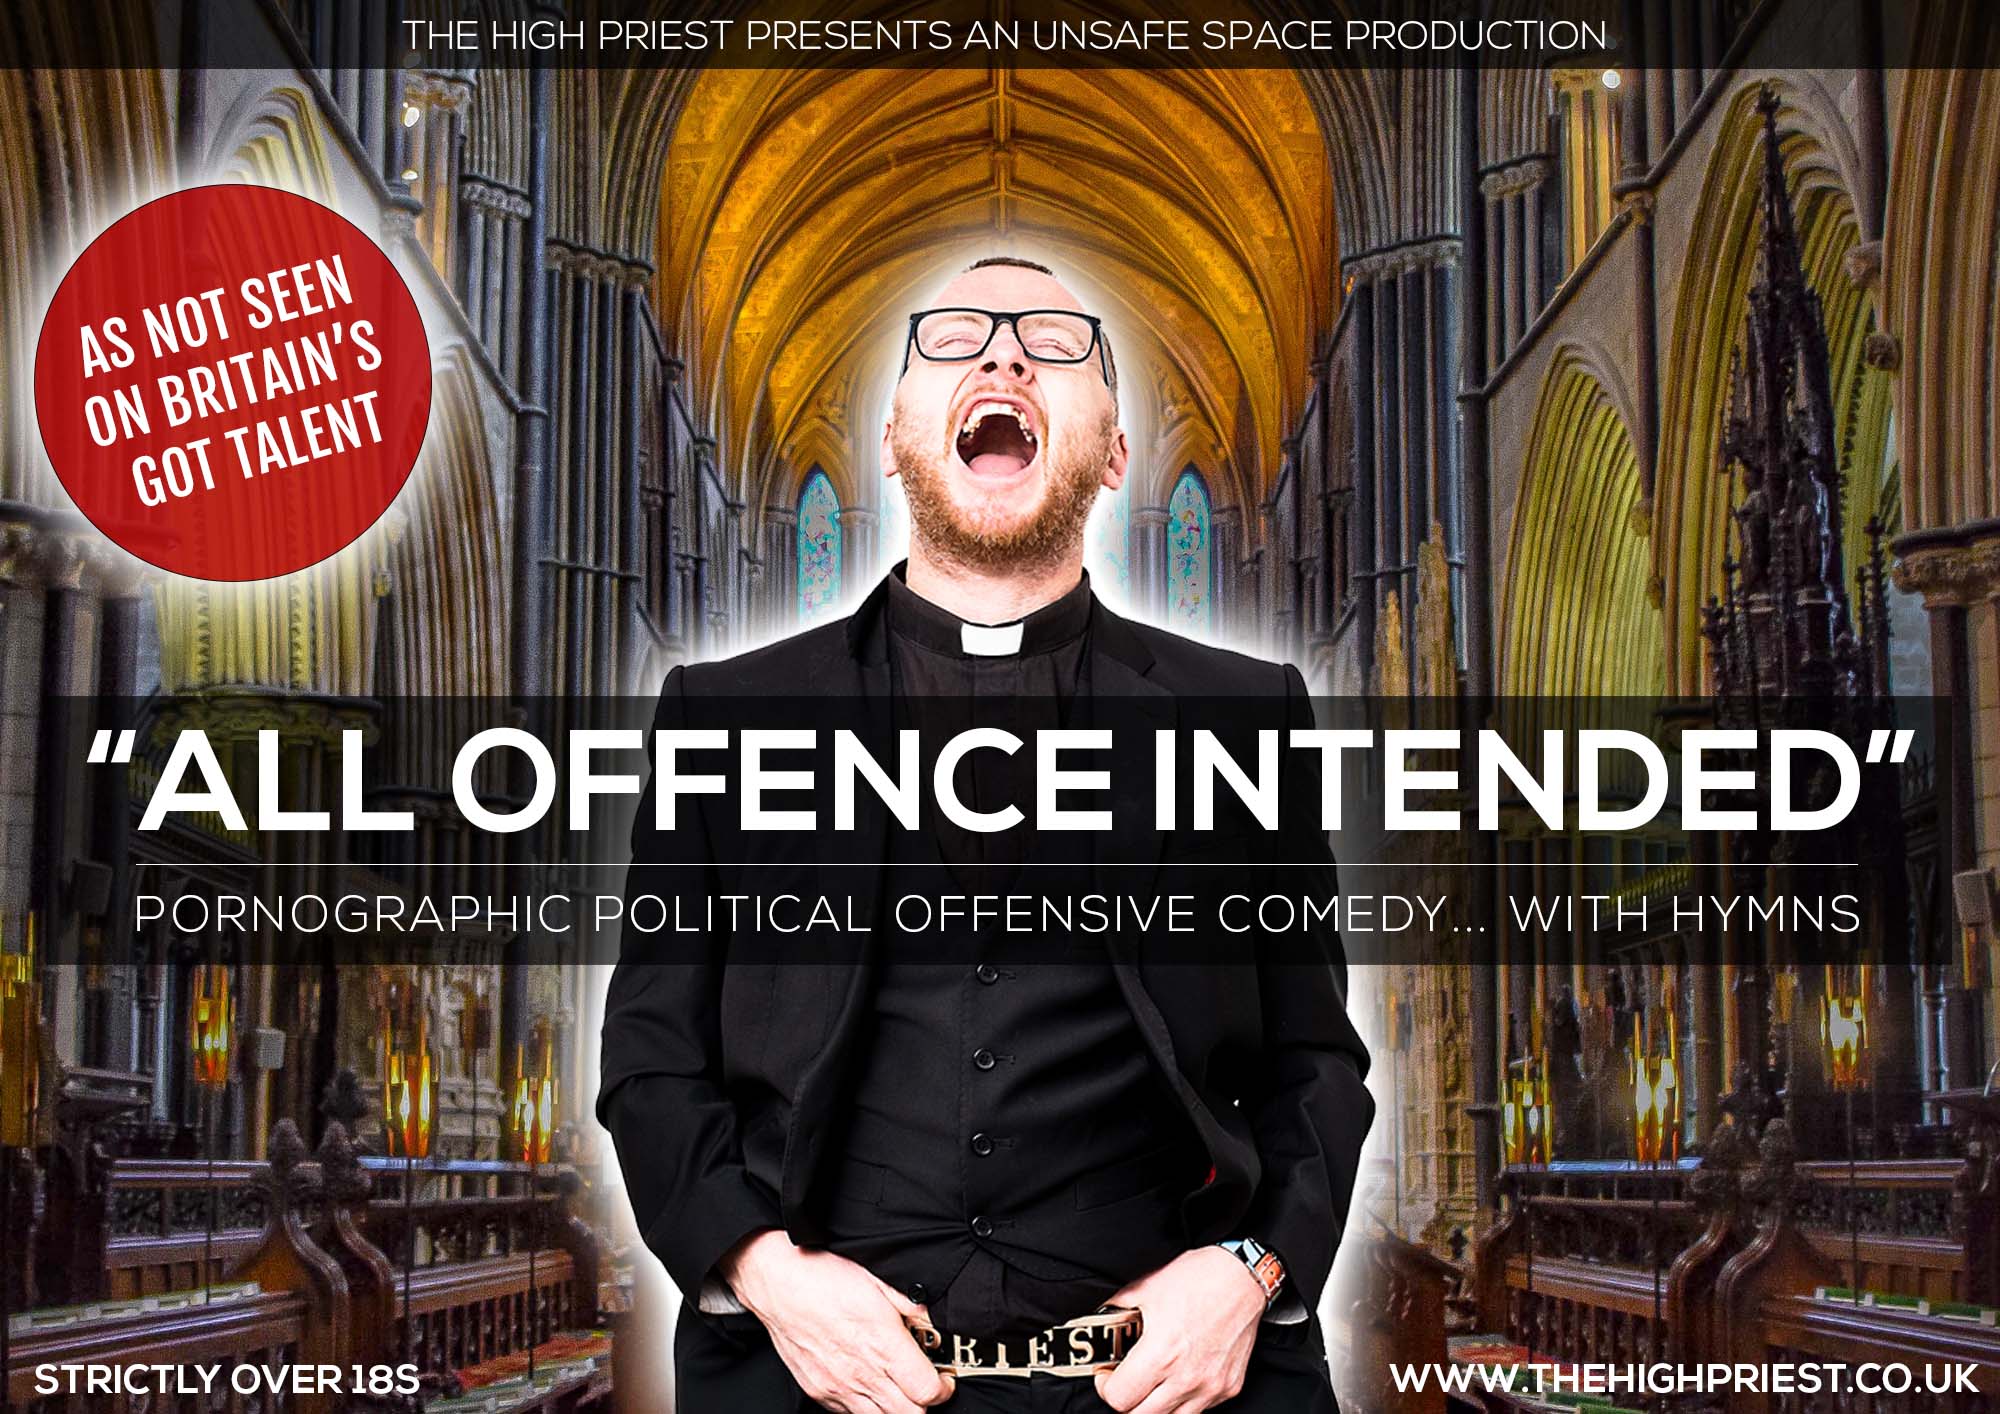 Poster of the High Priest show 'Pornographic Political Offensive Comedy... Hymns